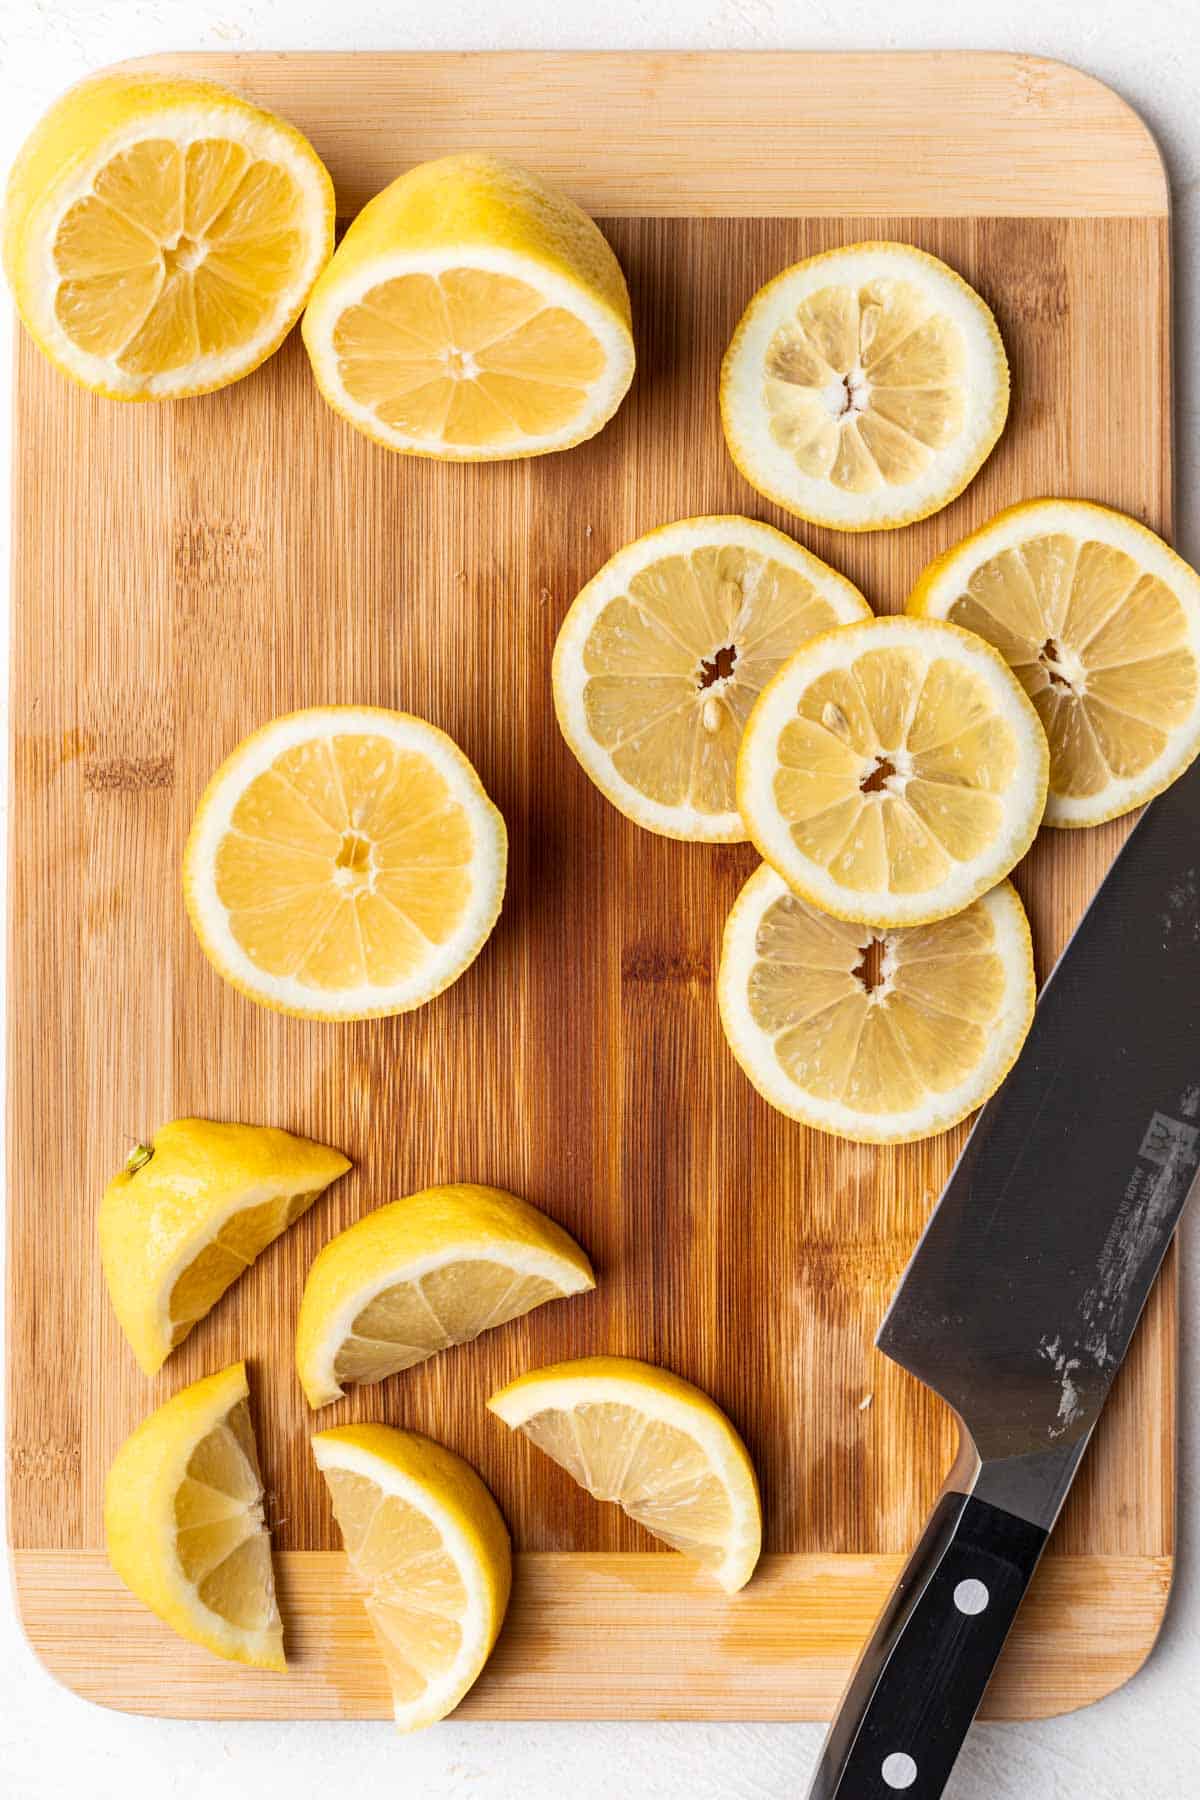 Lemon slices and wedges on a wood cutting board.